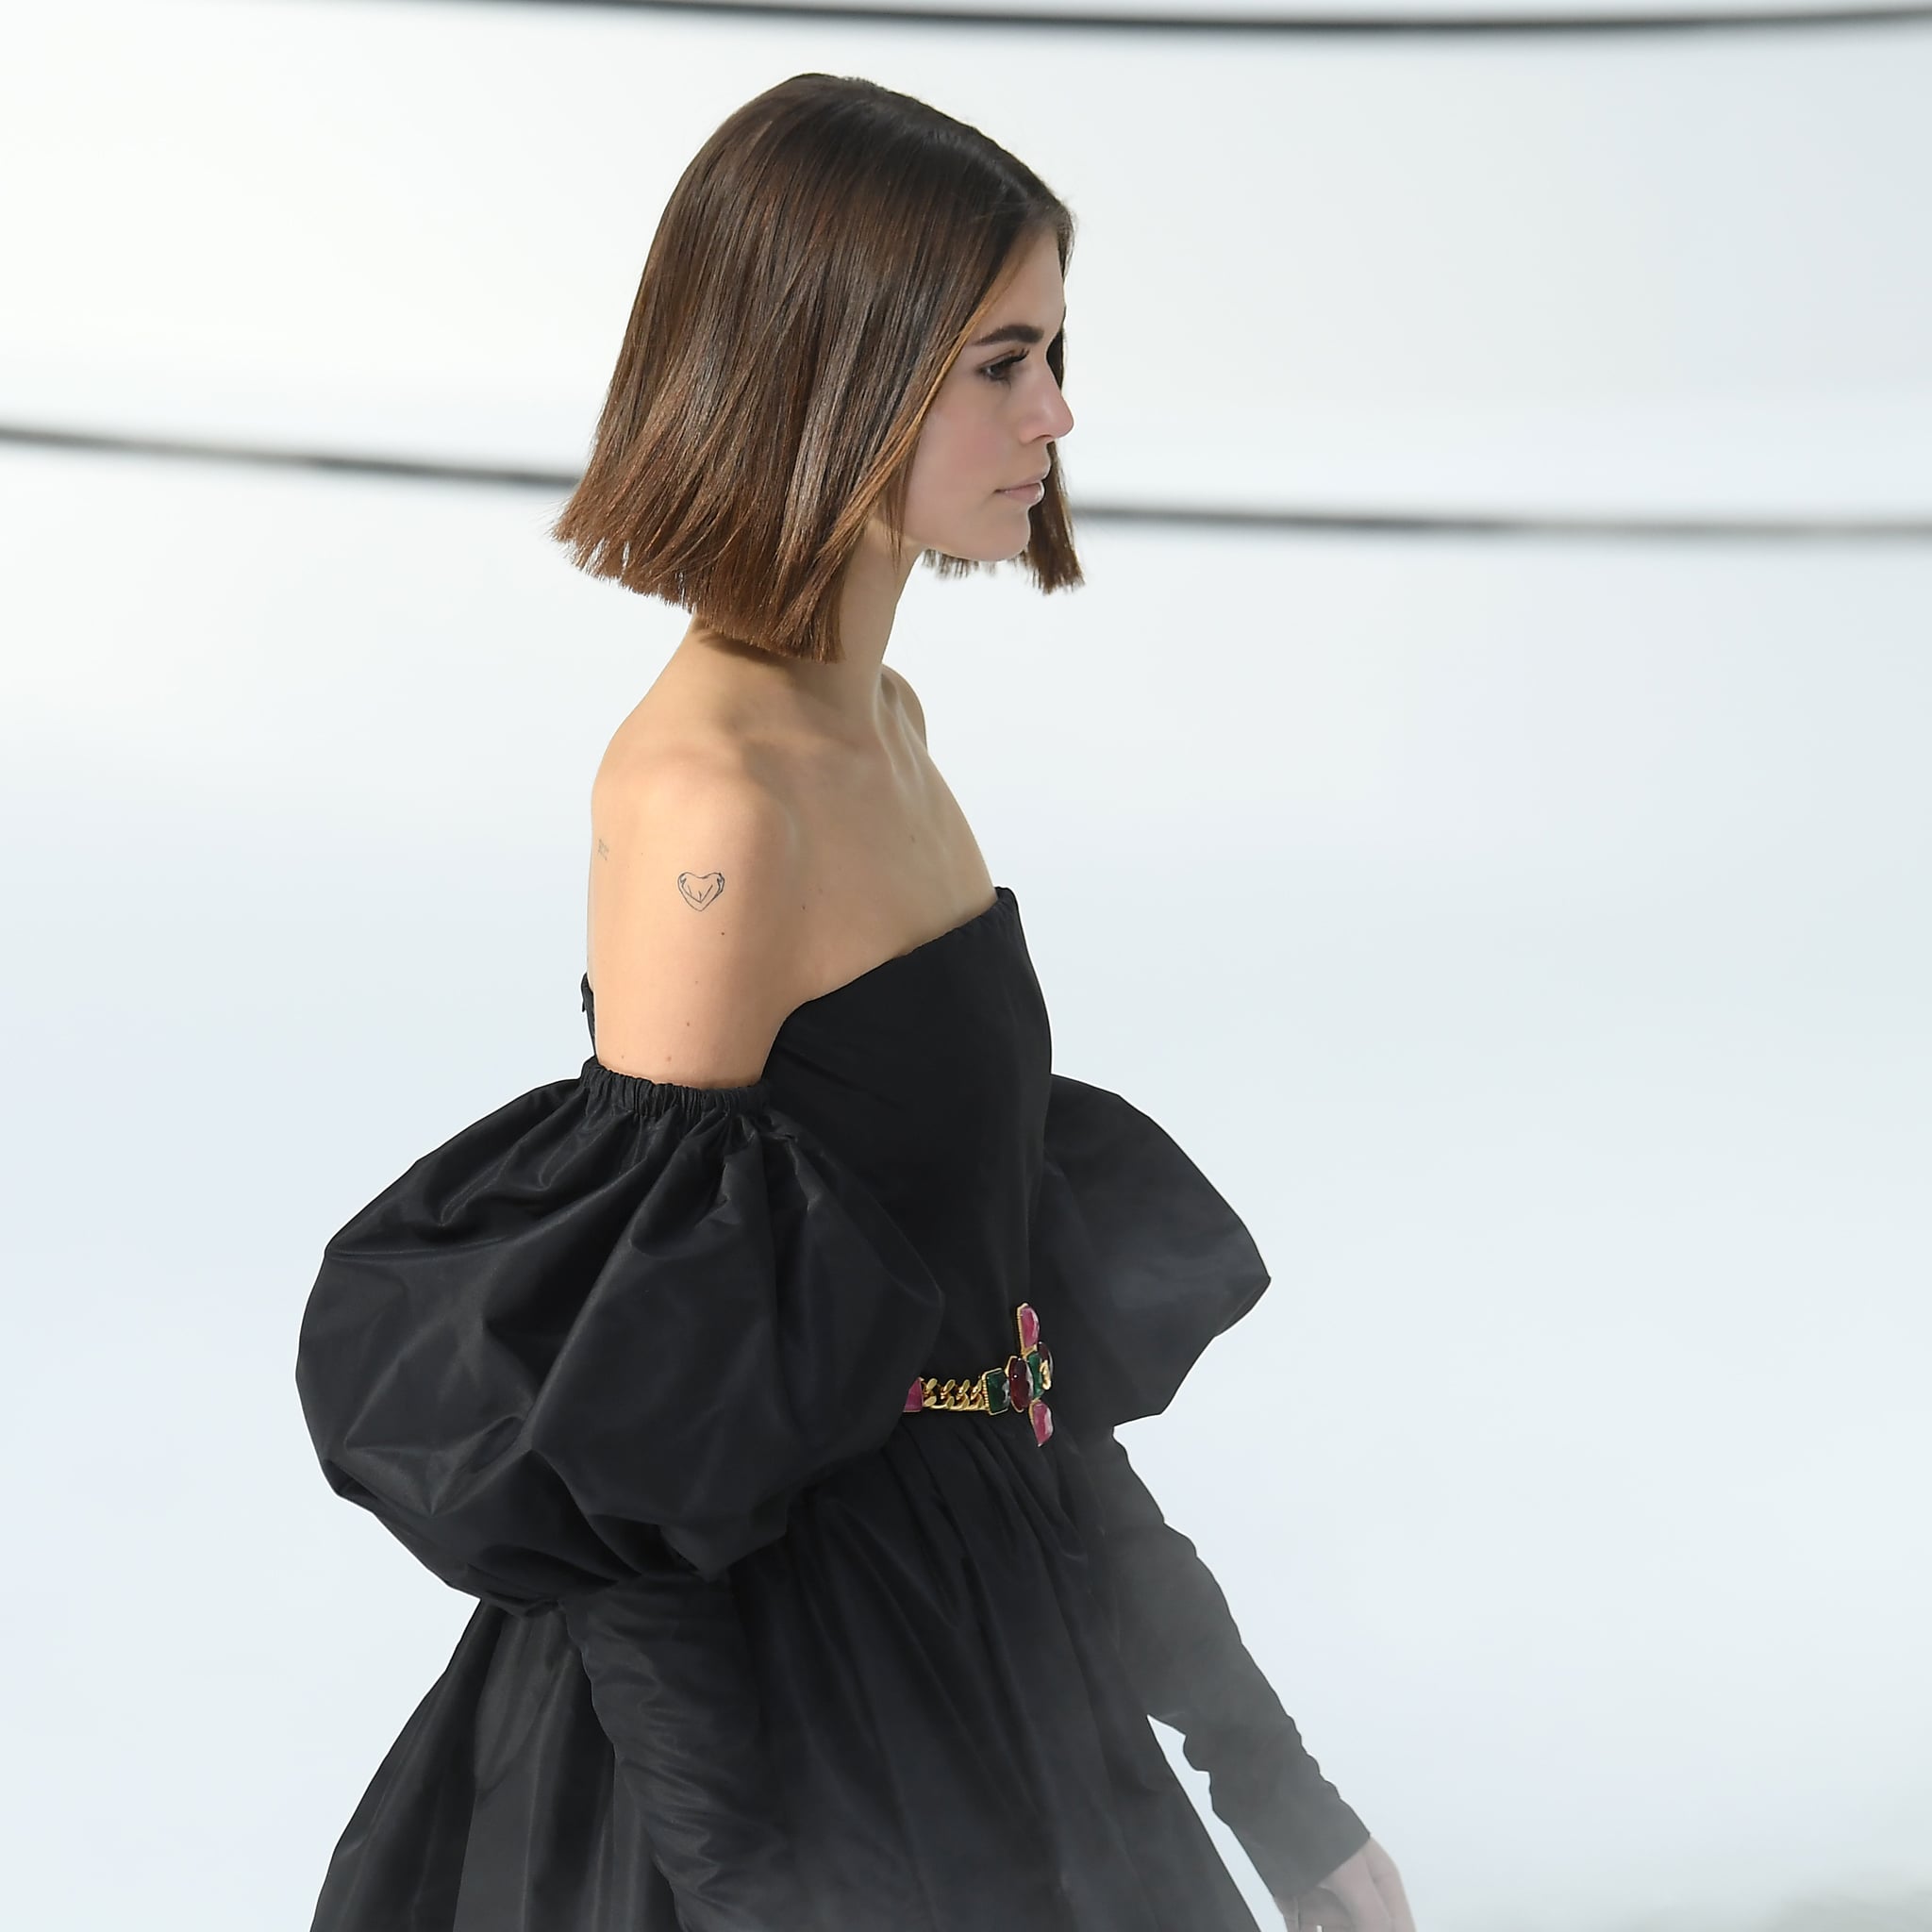 Kaia Gerbers Tattoos Locations Details and Meanings